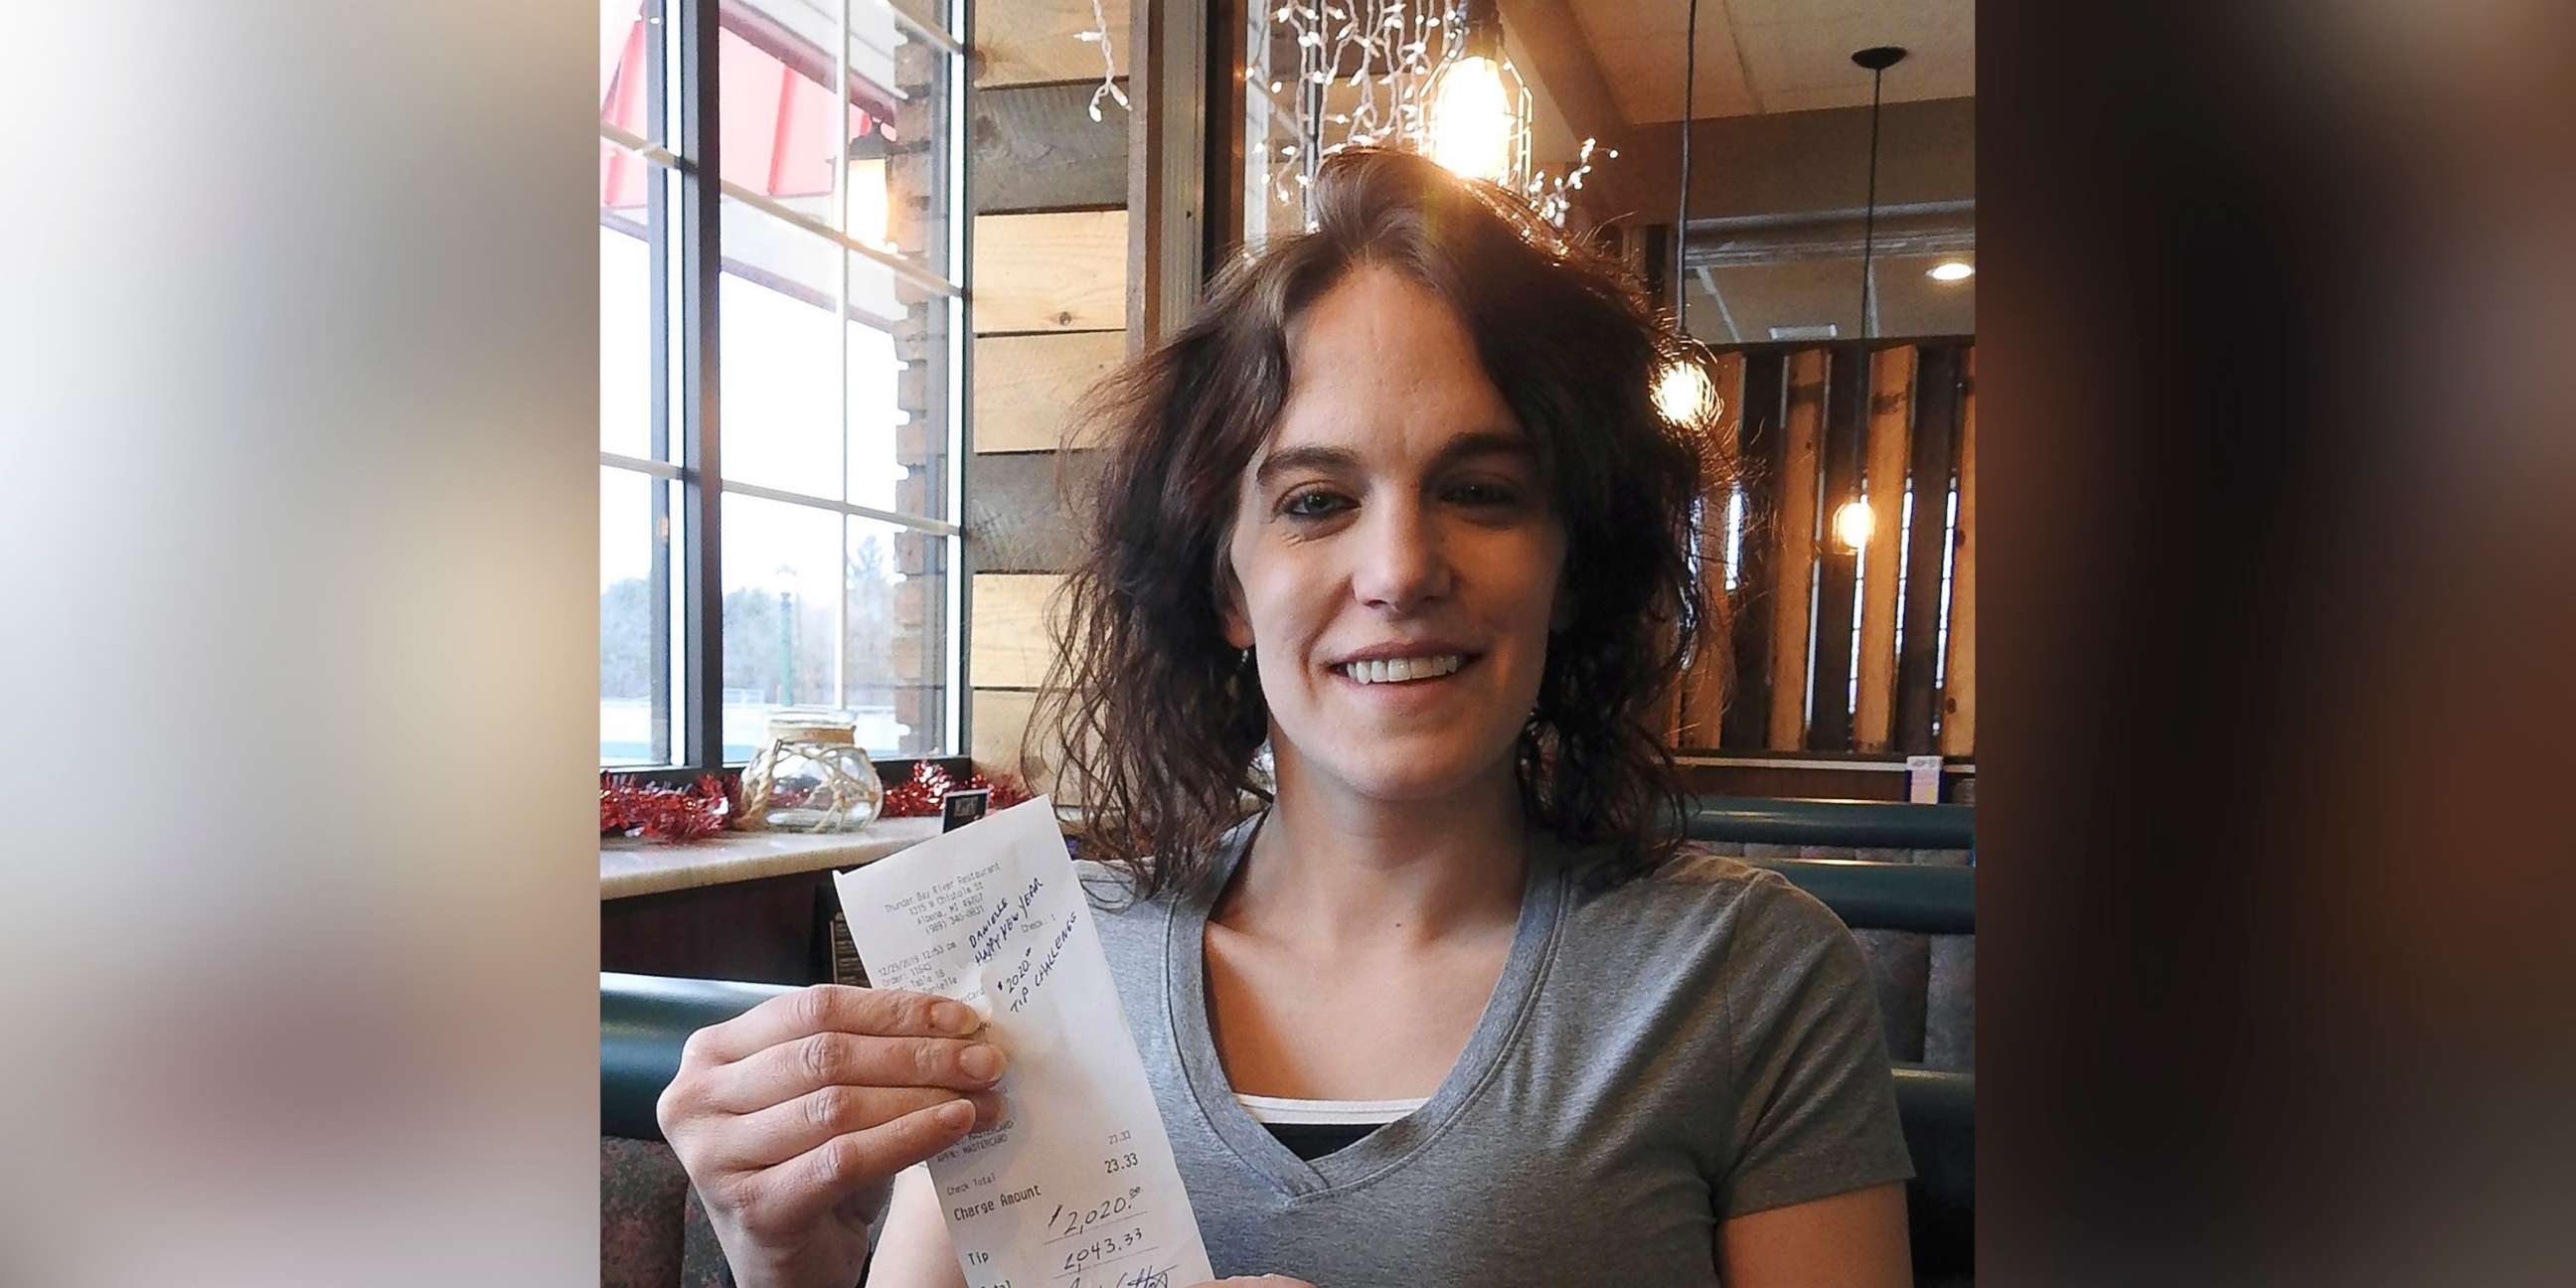 PHOTO: Server Danielle Franzoni holds a receipt from a customer with a $2,020 tip included at Thunder Bay River Restaurant in Alpena, Mich., Dec. 30, 2019. The credit card receipt said "Happy New Year. 2020 Tip Challenge."